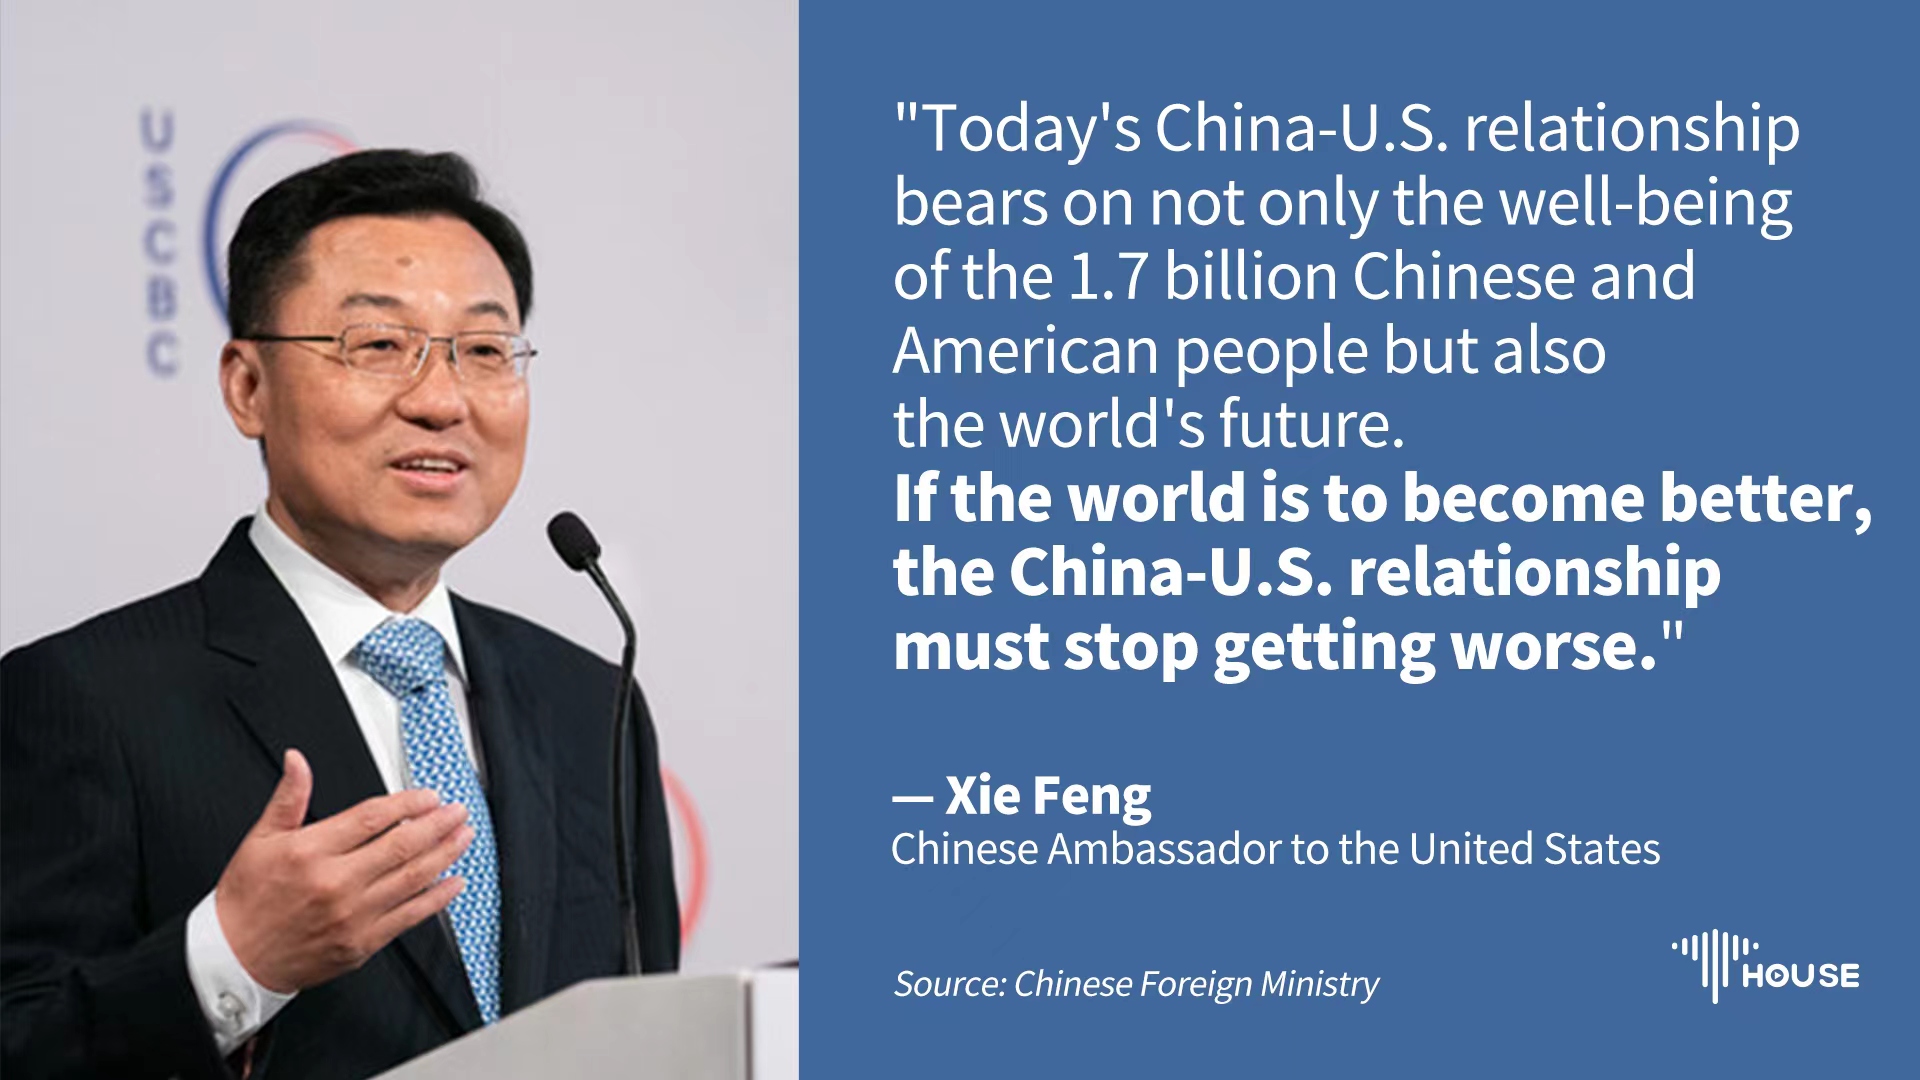 Chinese Ambassador to the U.S. Xie Feng: China is a source of much-needed stability and certainty